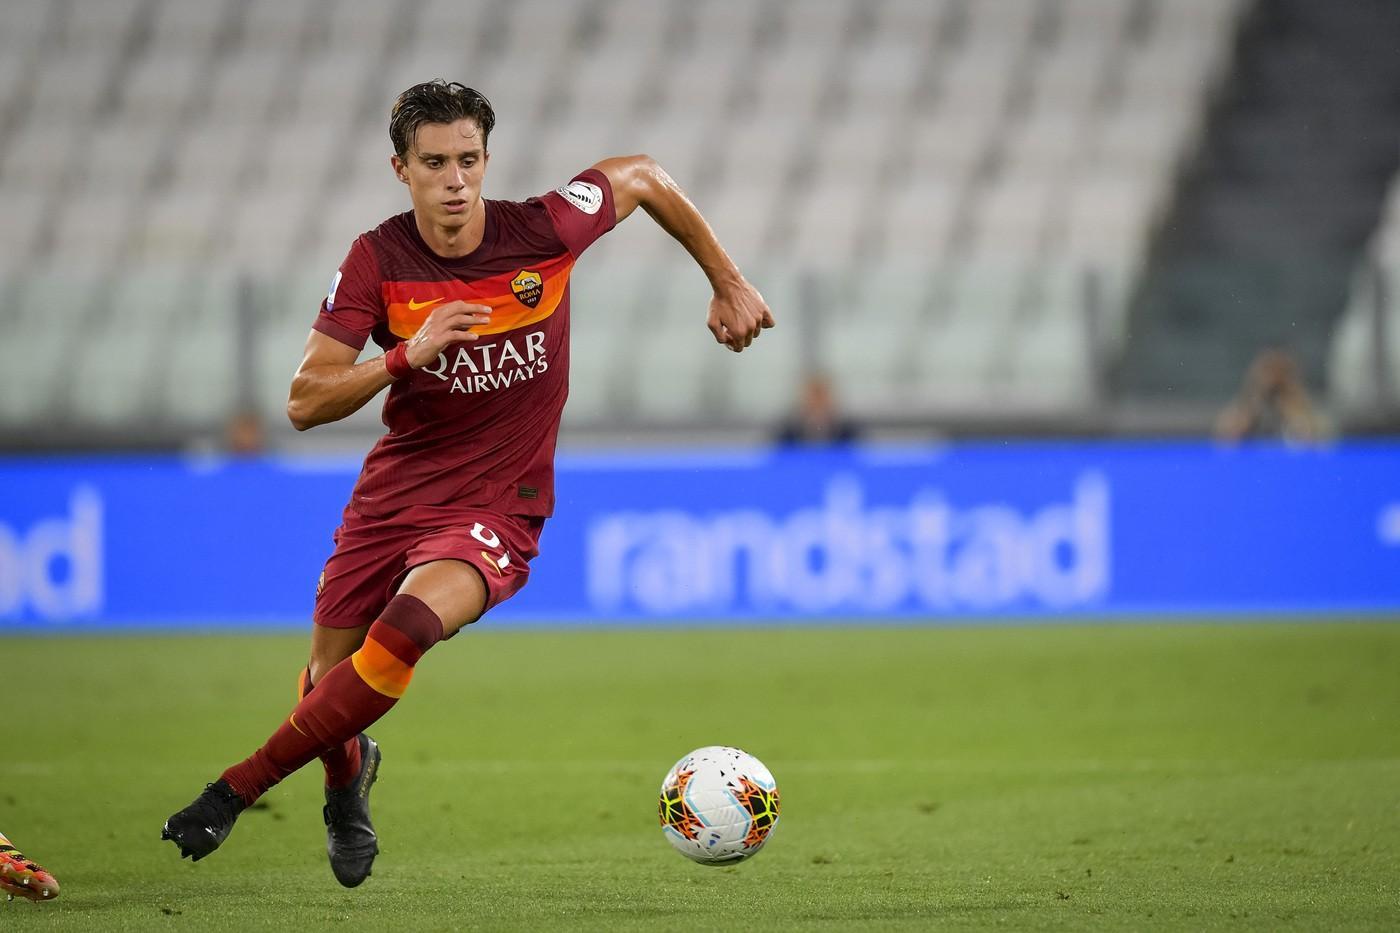  Chelsea left-back transfer target, Riccardo Calafiori, in action during a match for AS Roma.